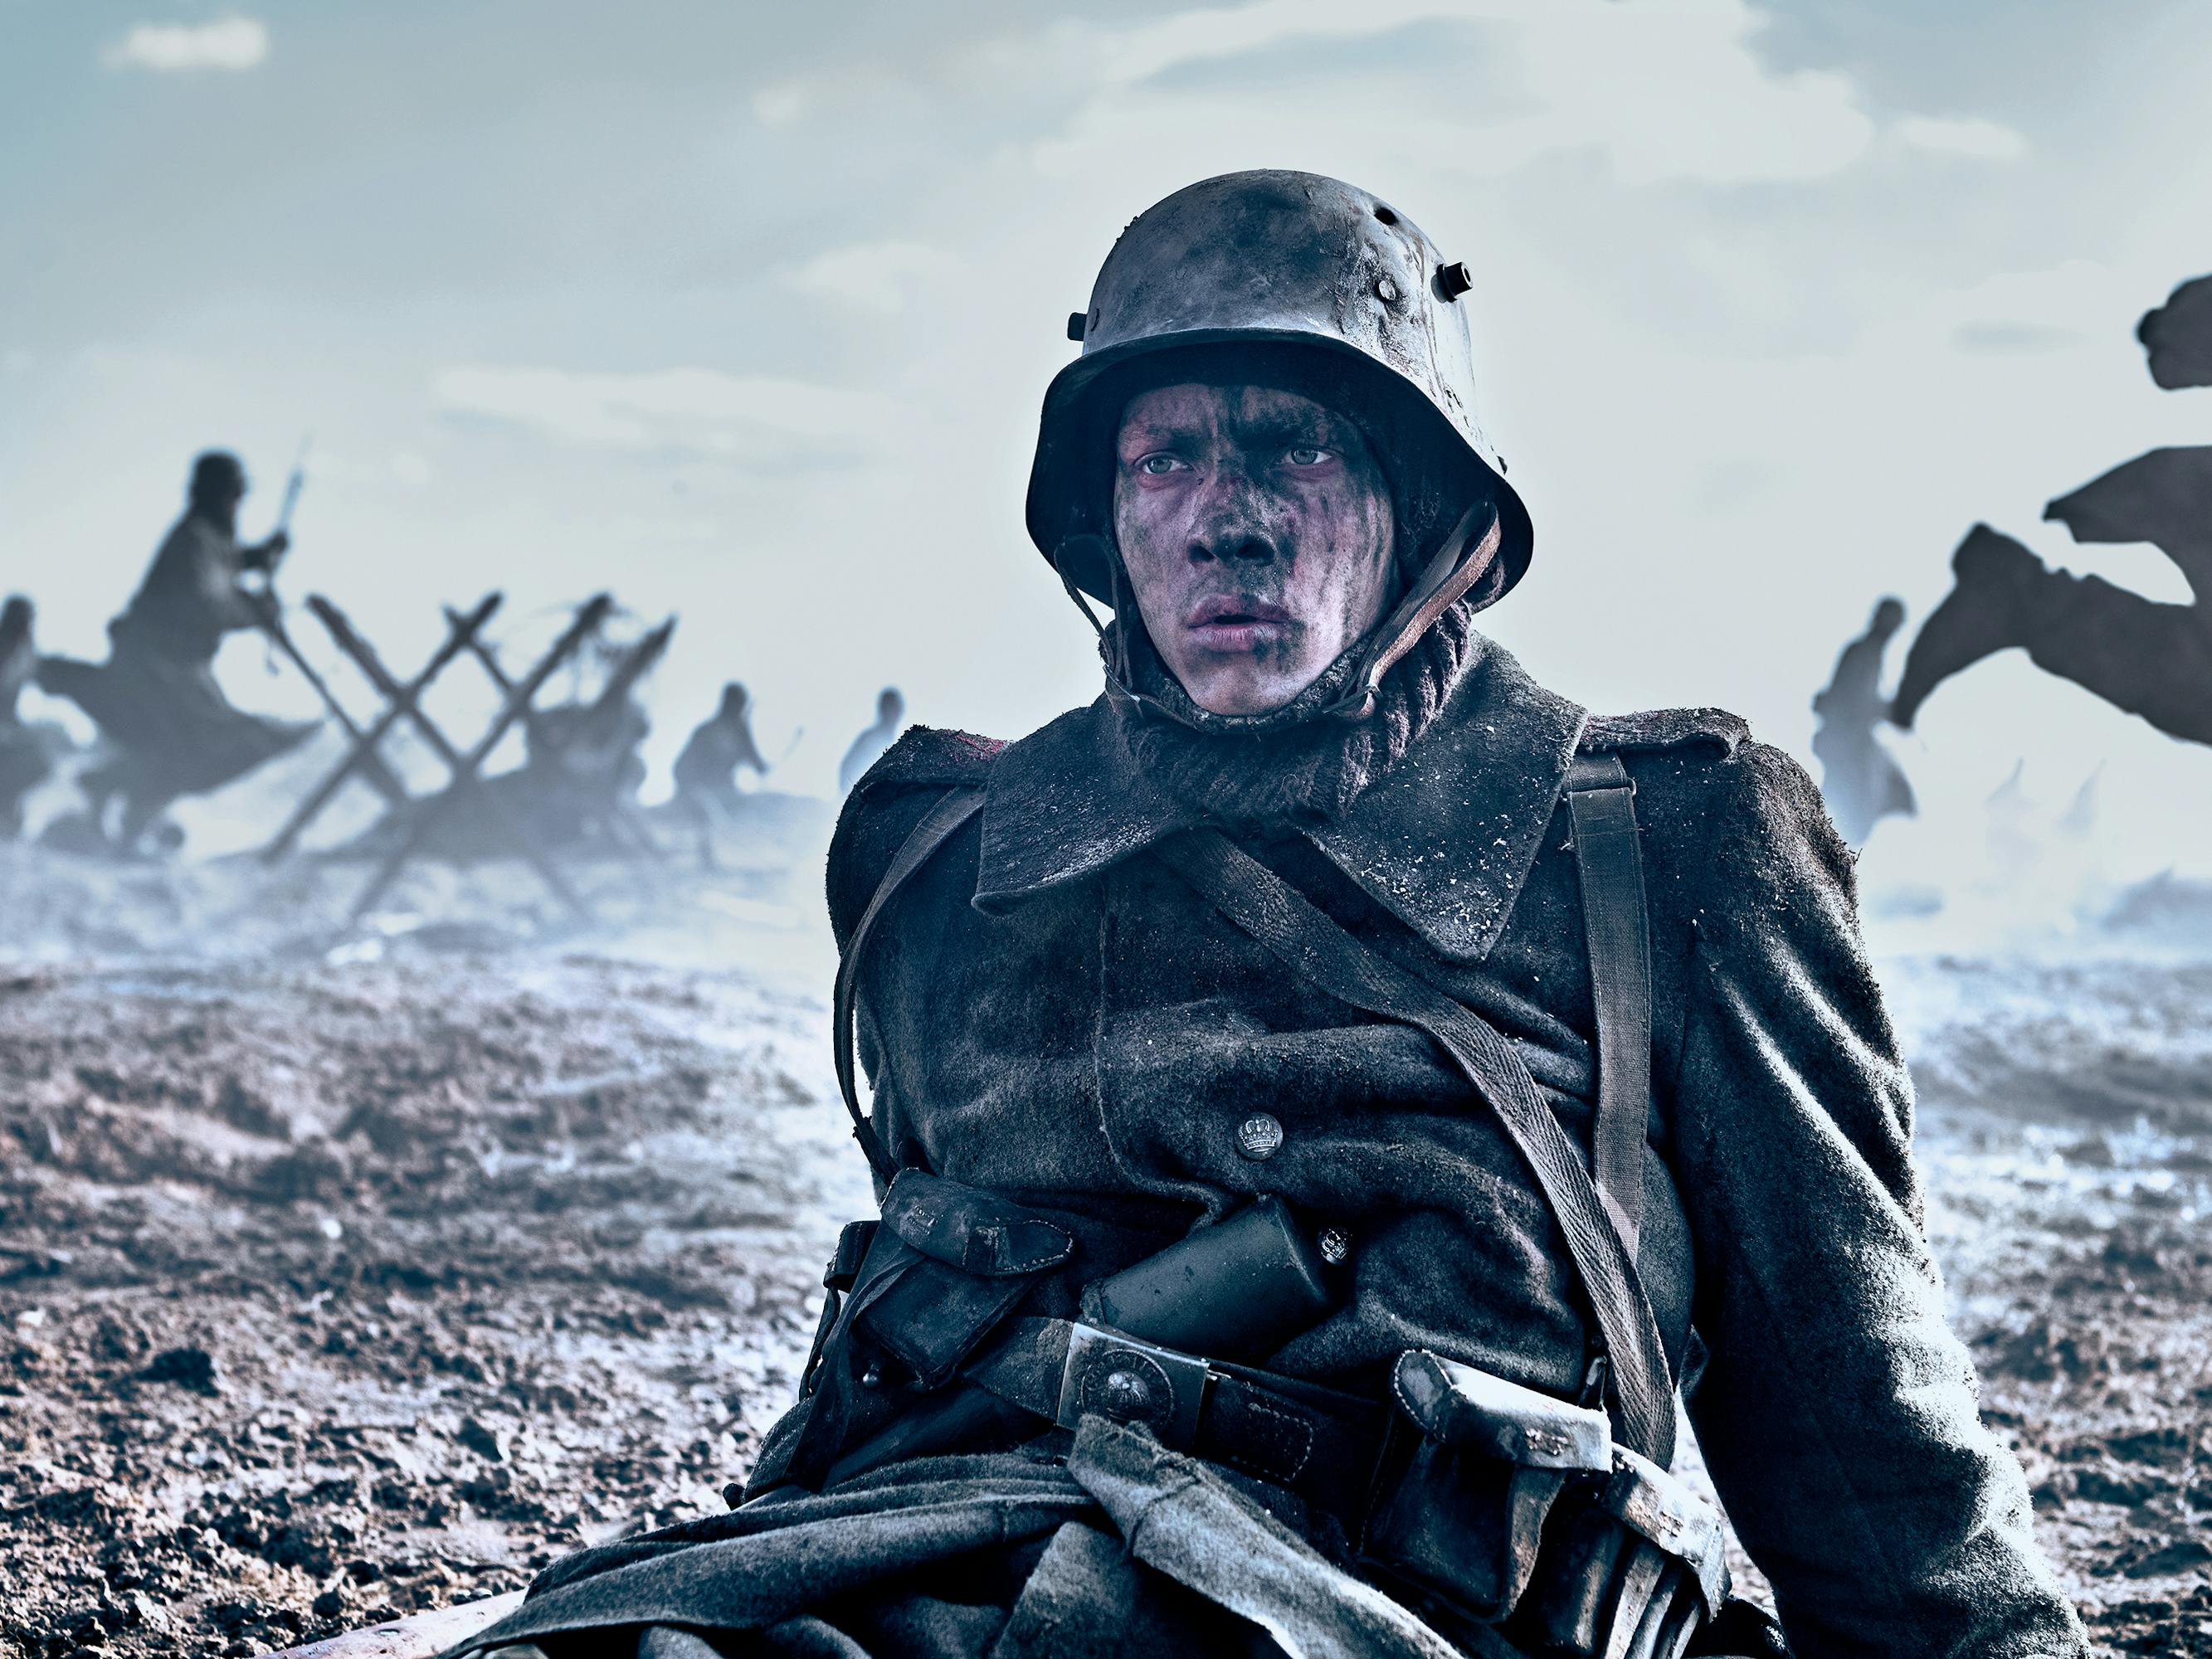 Paul Bäumer (Felix Kammerer) sits on the muddy ground in his green uniform and helmet. His face is streaked with mud, and behind him are soldiers running around and fighting.